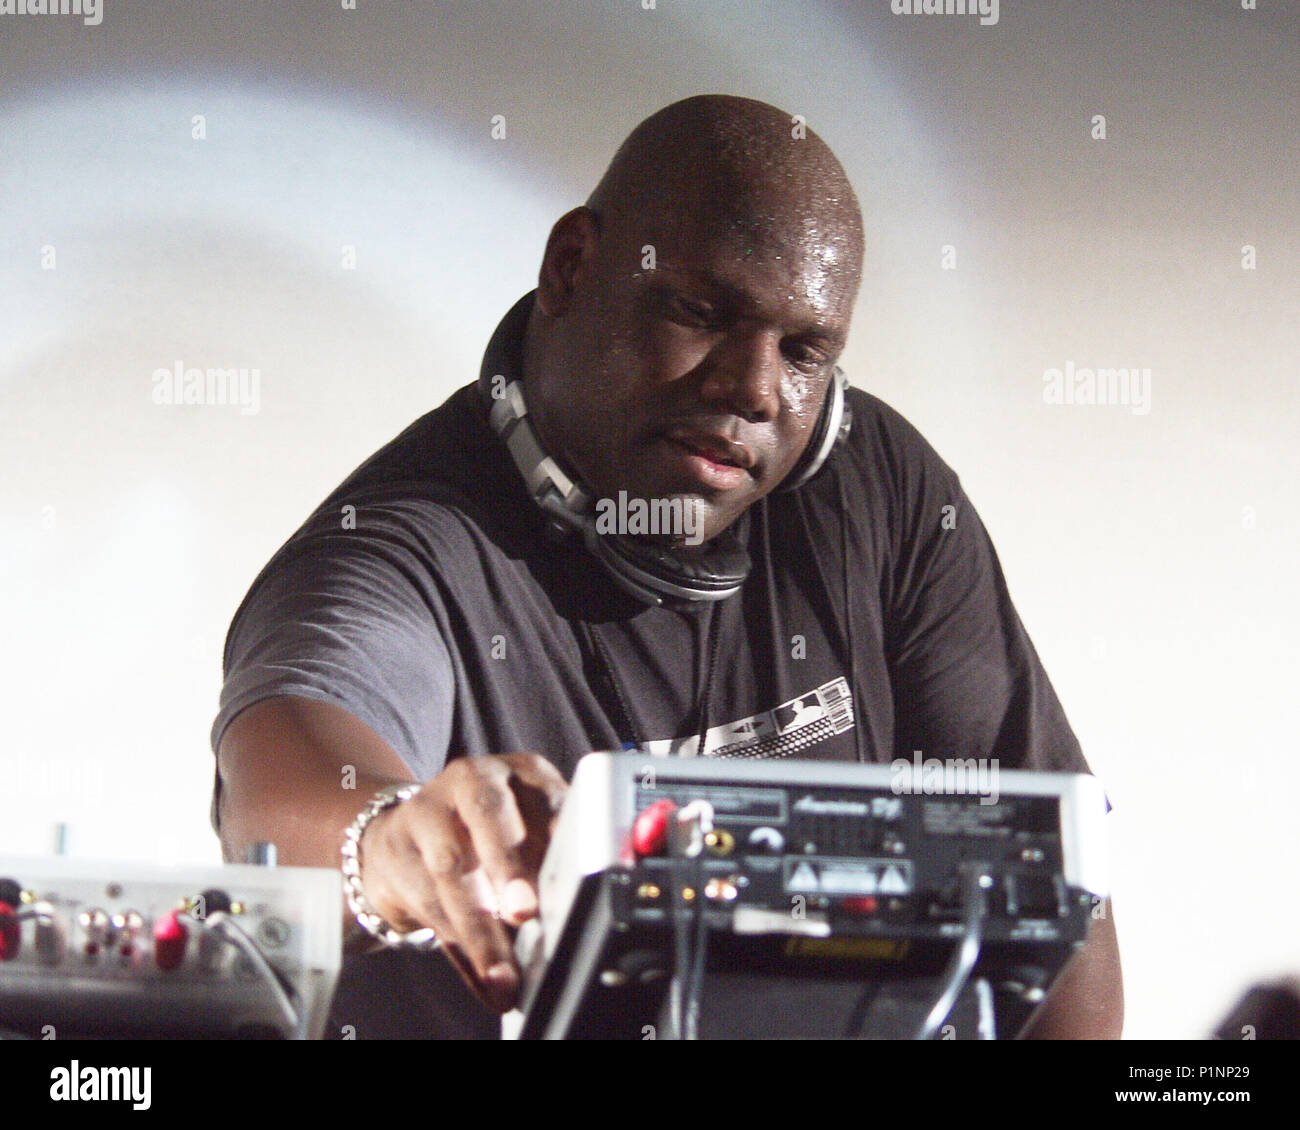 Carl Cox Dj High Resolution Stock Photography and Images - Alamy